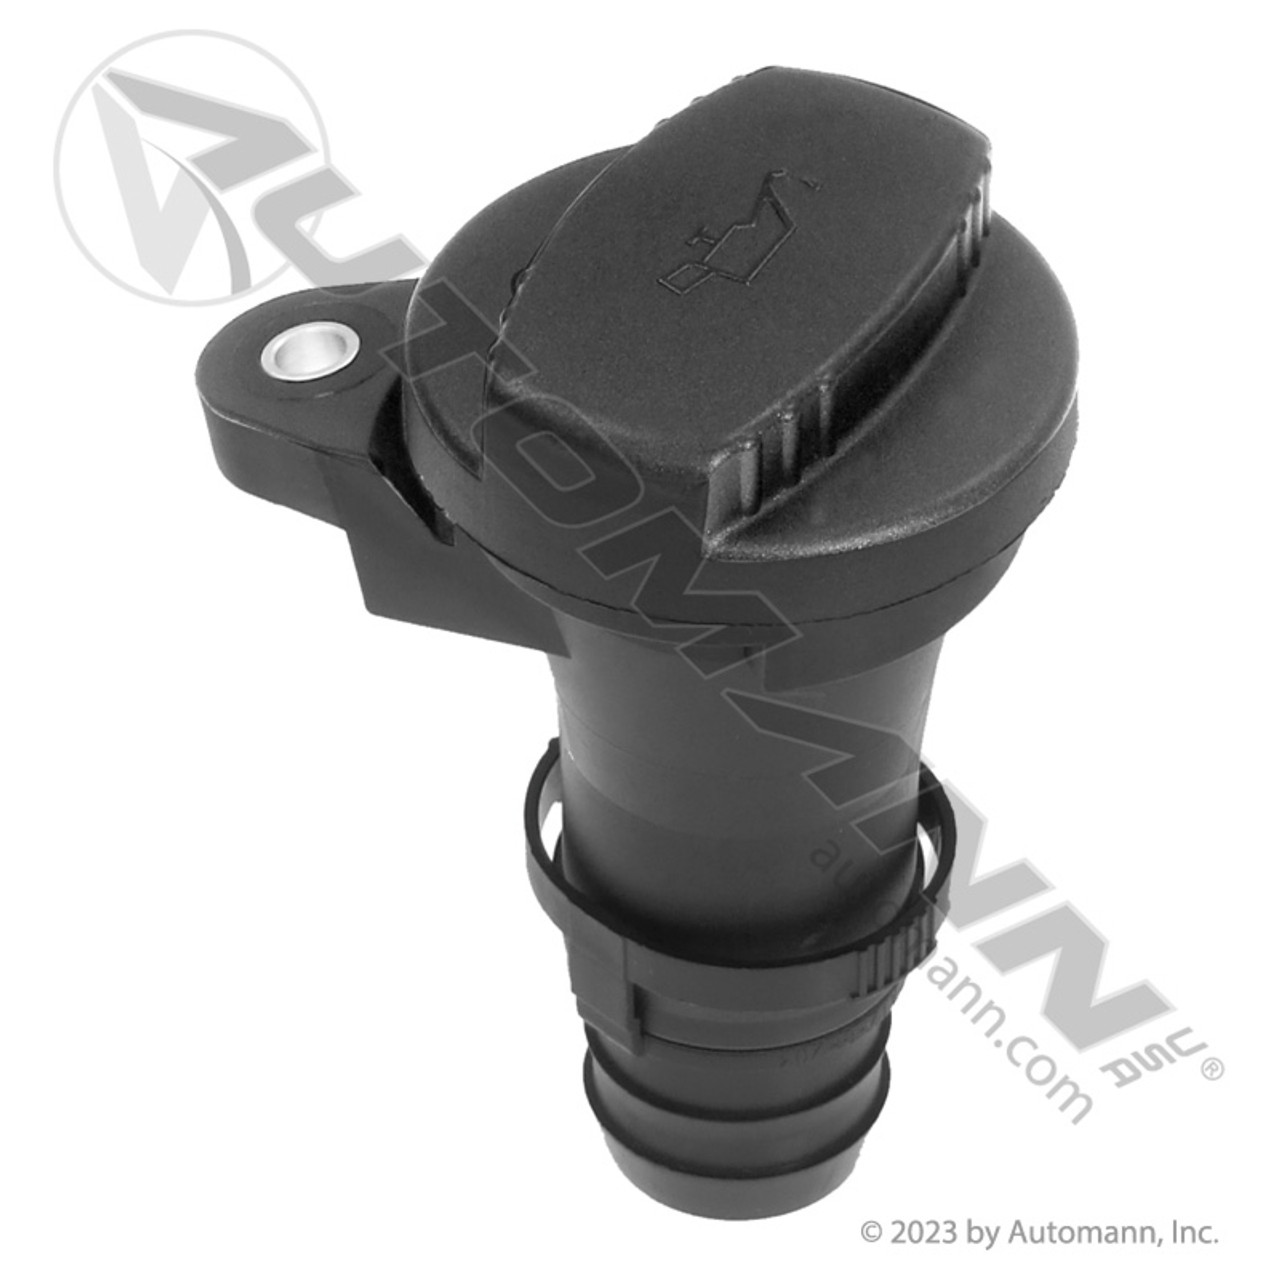 Oil Fill Cap Assembly for Freightliner w/ Cummins ISX15- replaces NPU07310001027